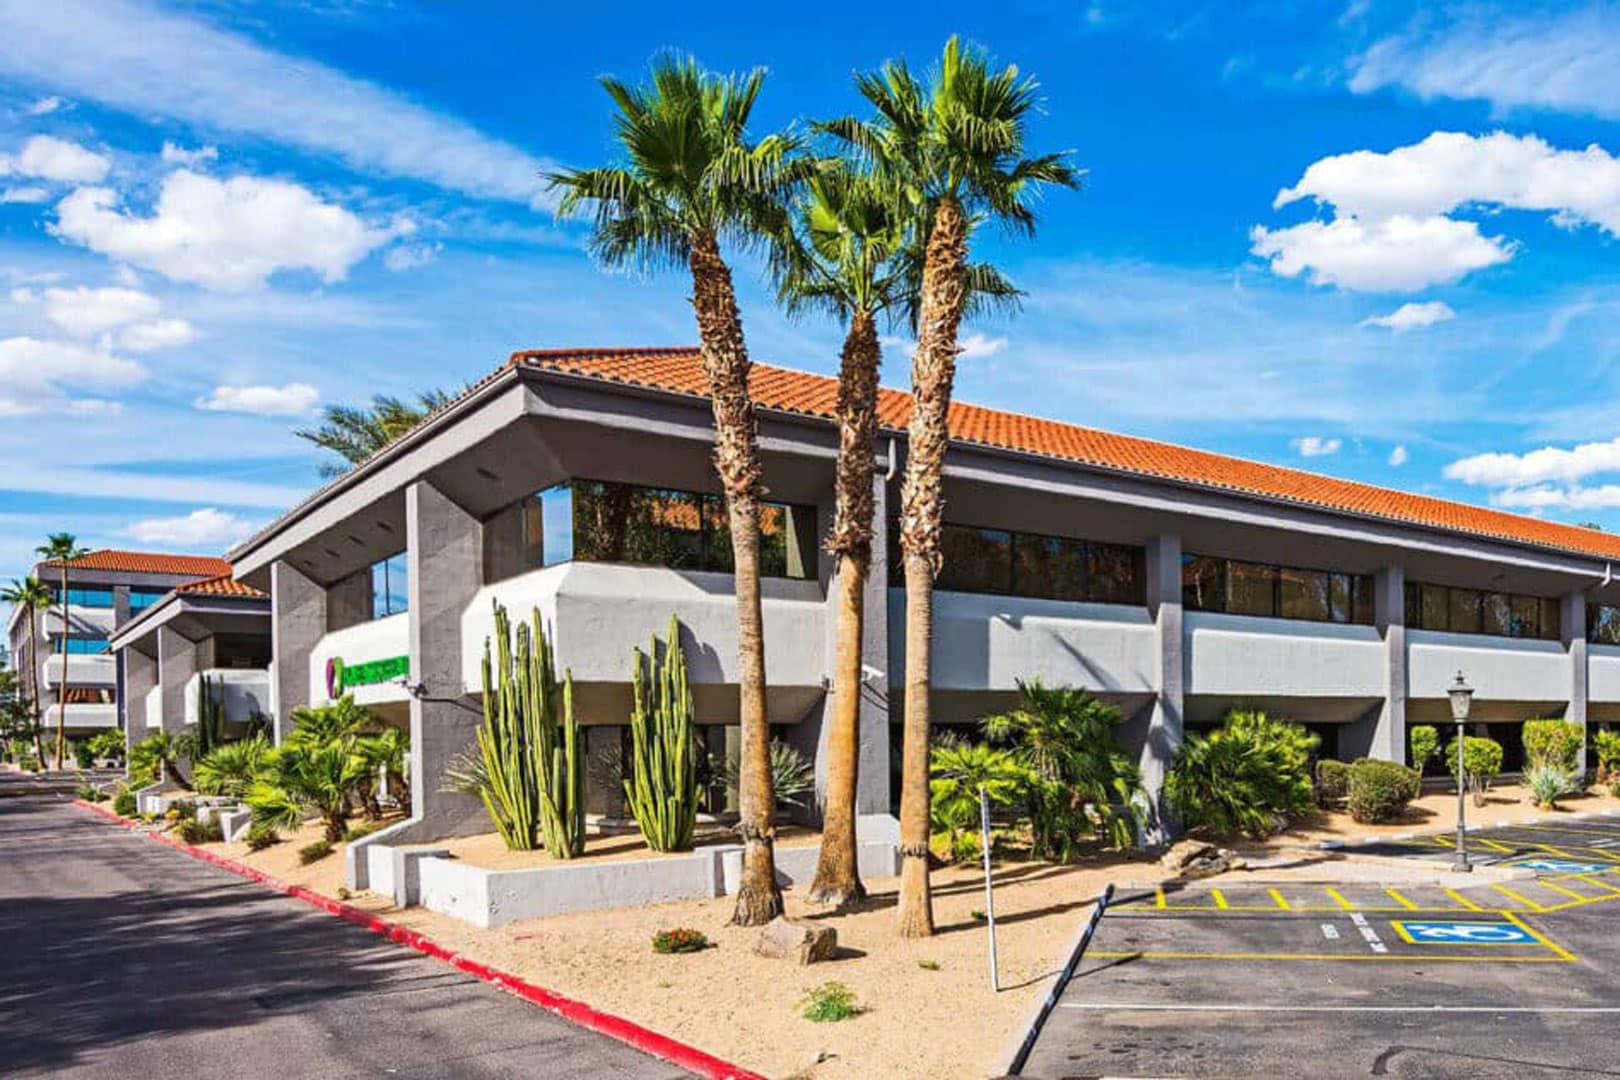 Site Square I is a Multi-tenant office property in midtown Phoenix, Arizona